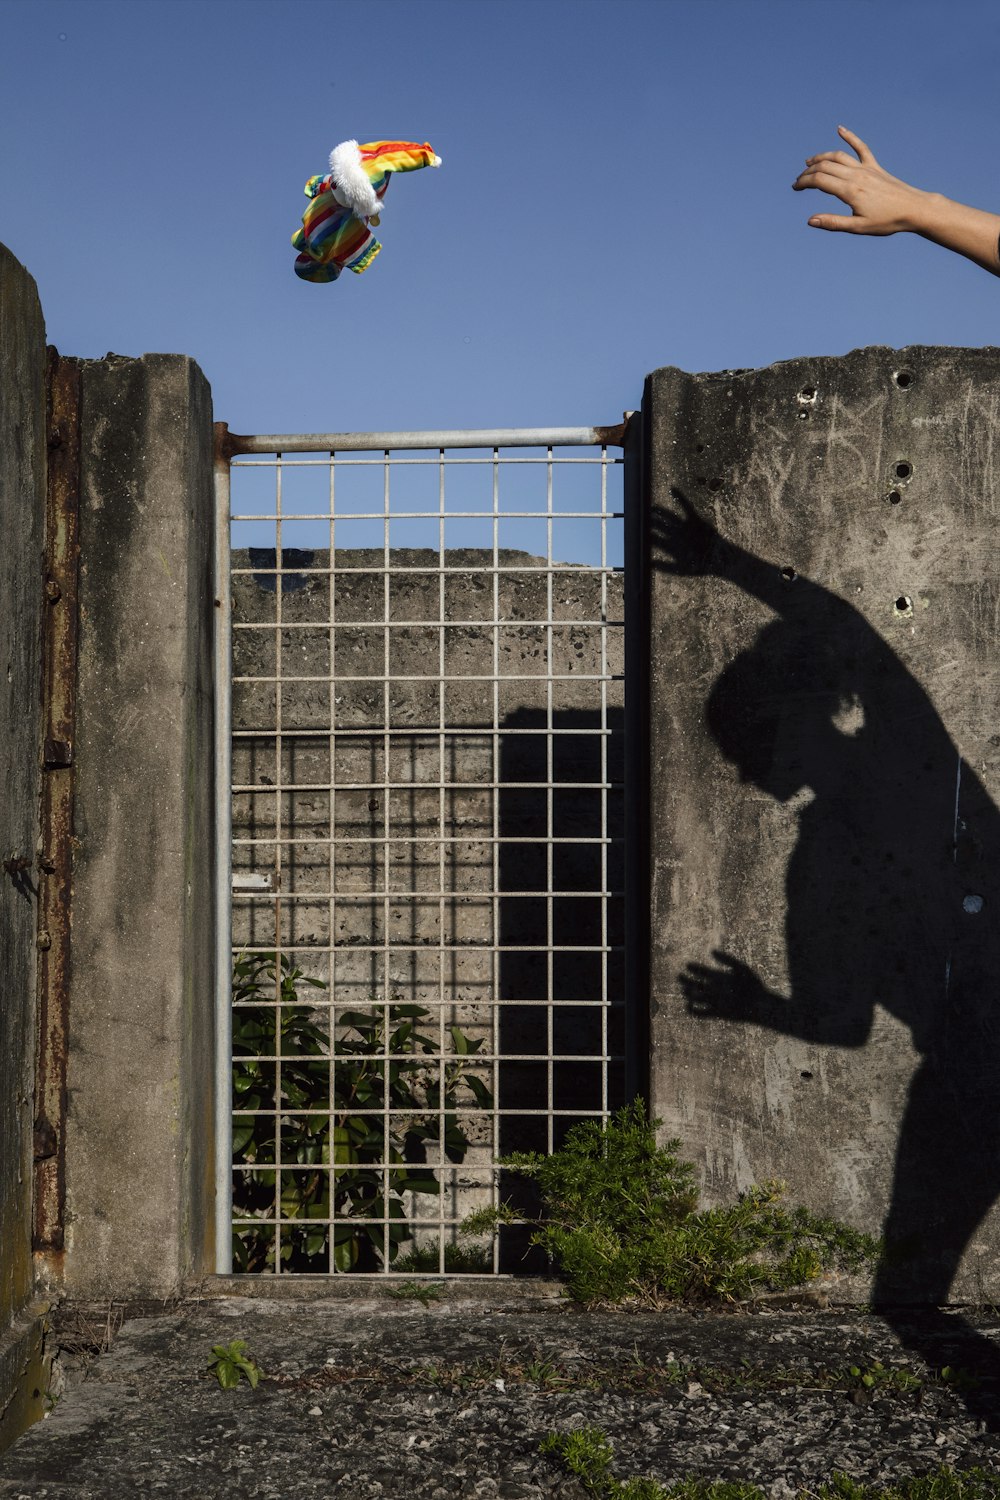 a man flying a kite over a cement wall